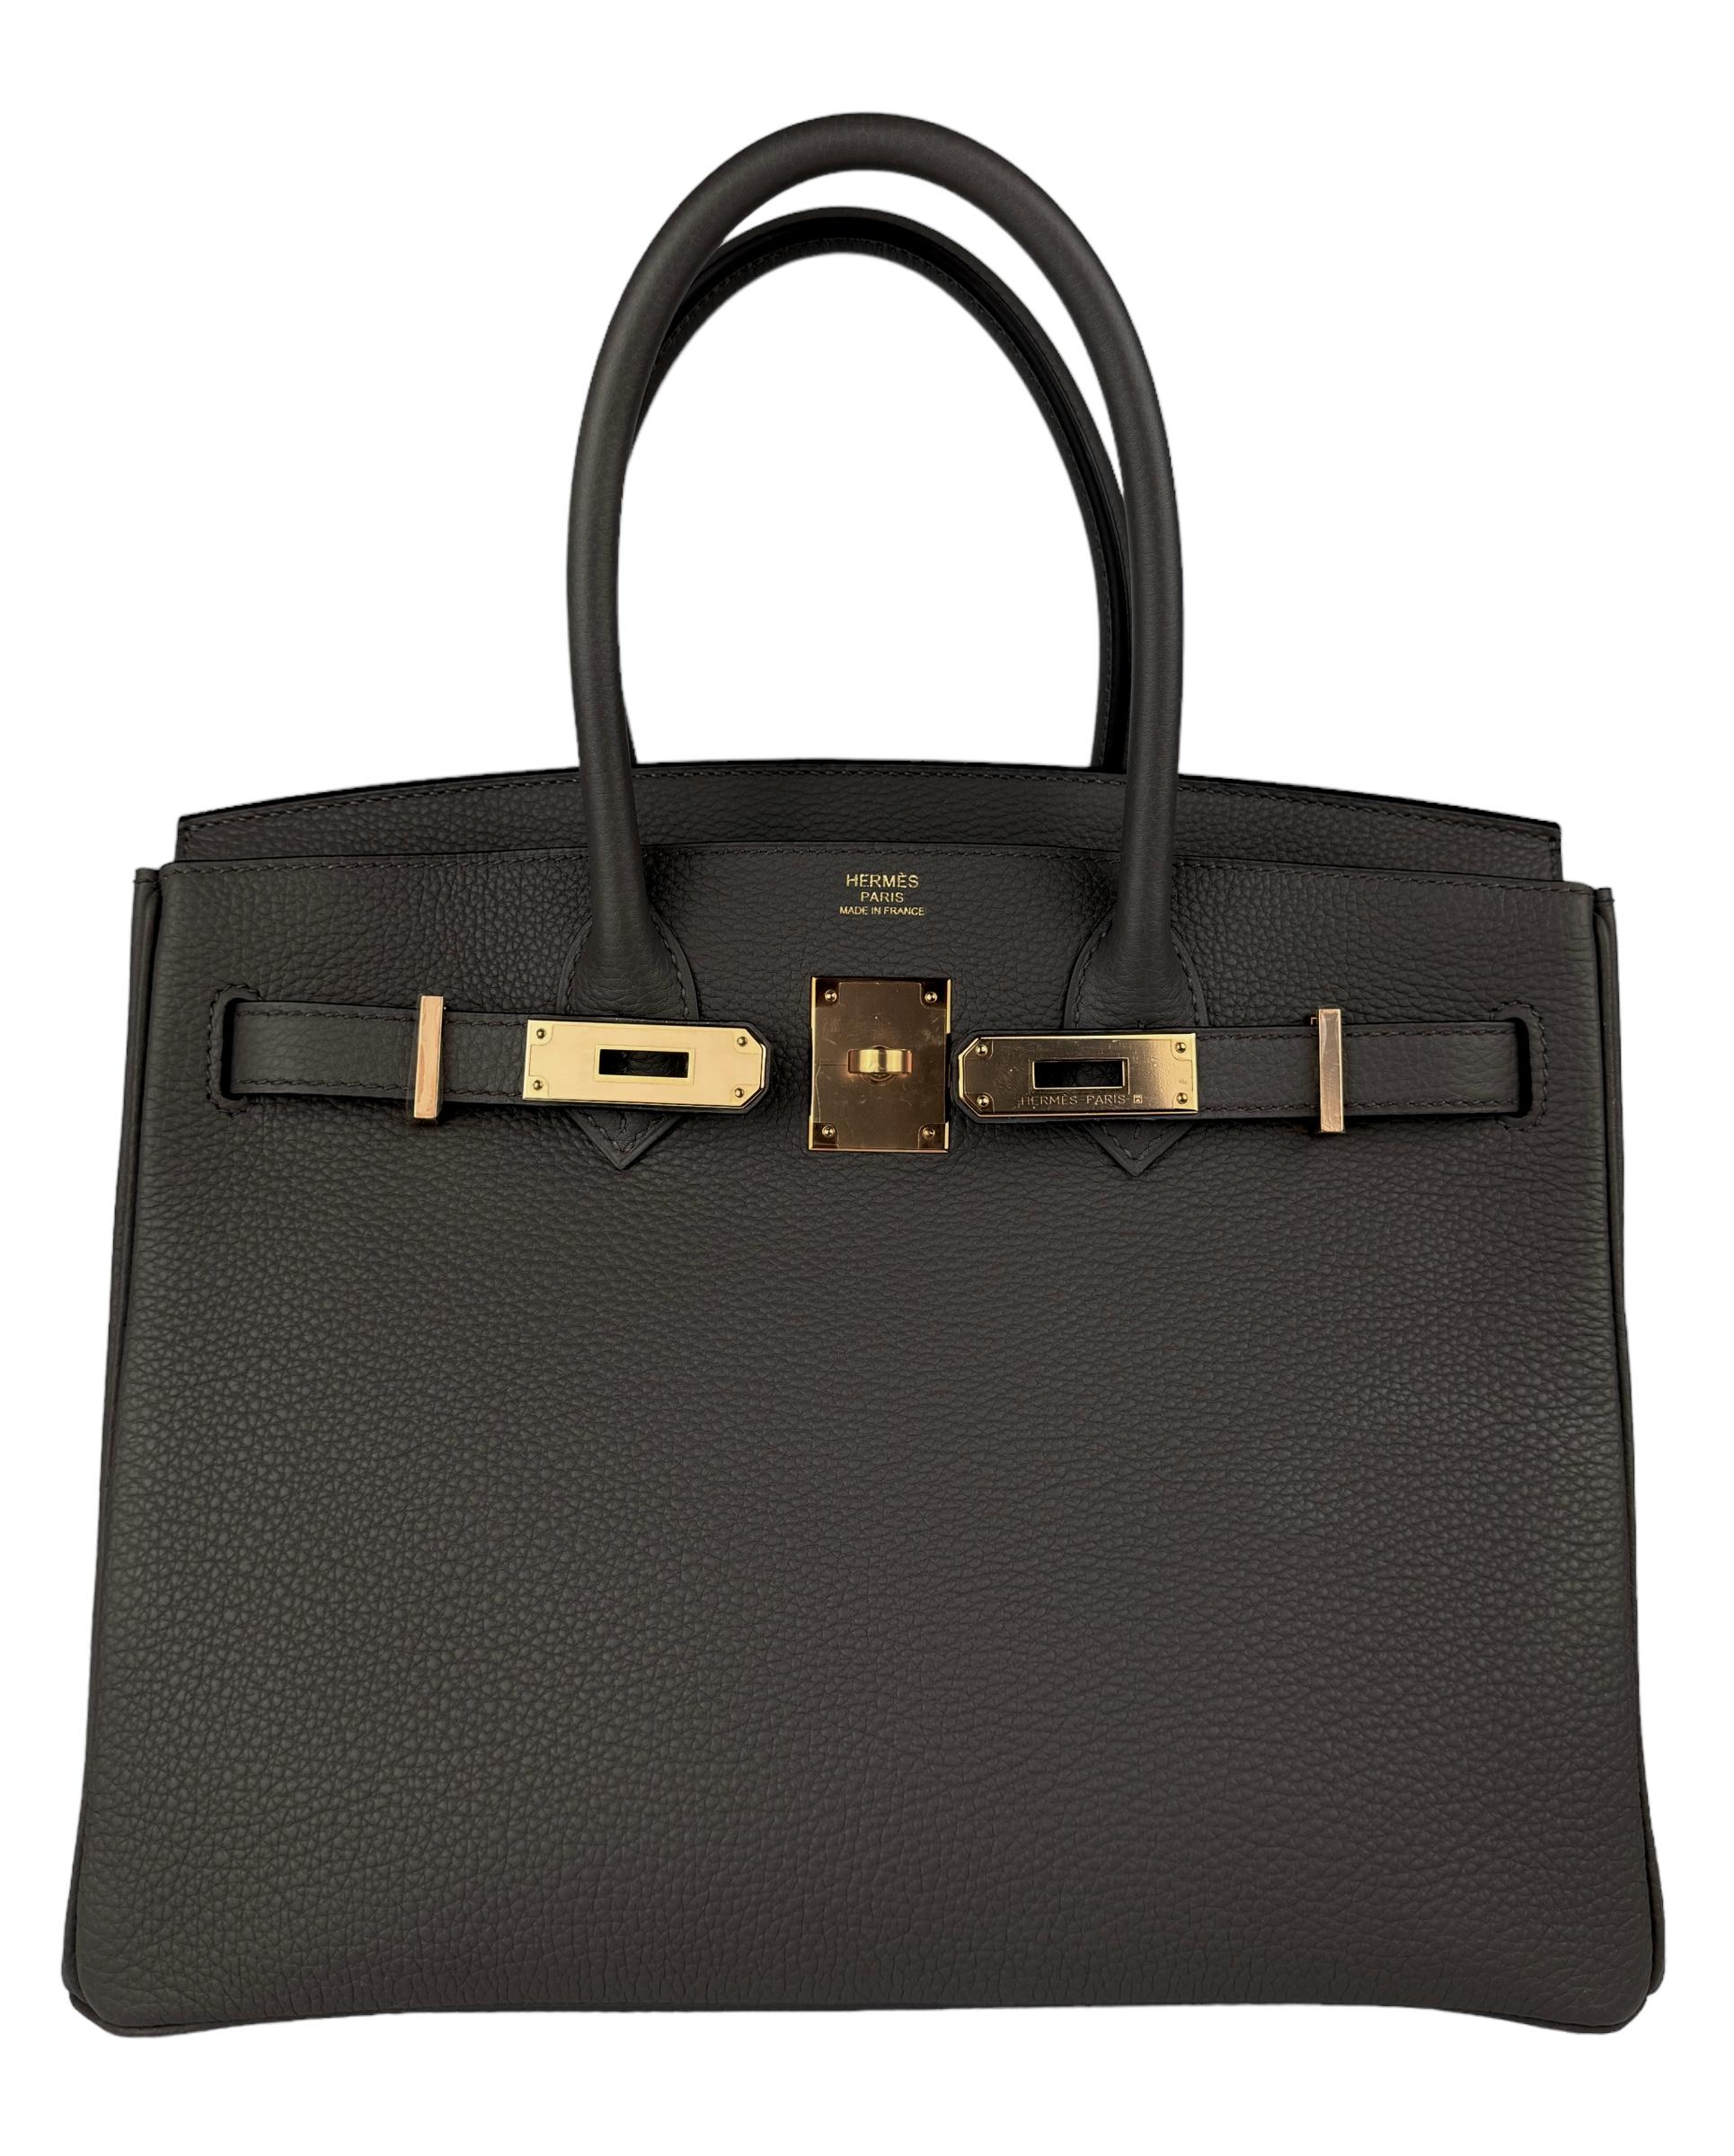 Absolutely Stunning Most Coveted As New Hermes Birkin 30 Etain Togo Leather complimented by Rose Gold Hardware. As New 2020 Y Stamp.  

Shop with Confidence from Lux Addicts. Authenticity Guaranteed! 

Lux Addicts is a Premier Luxury Dealer and one